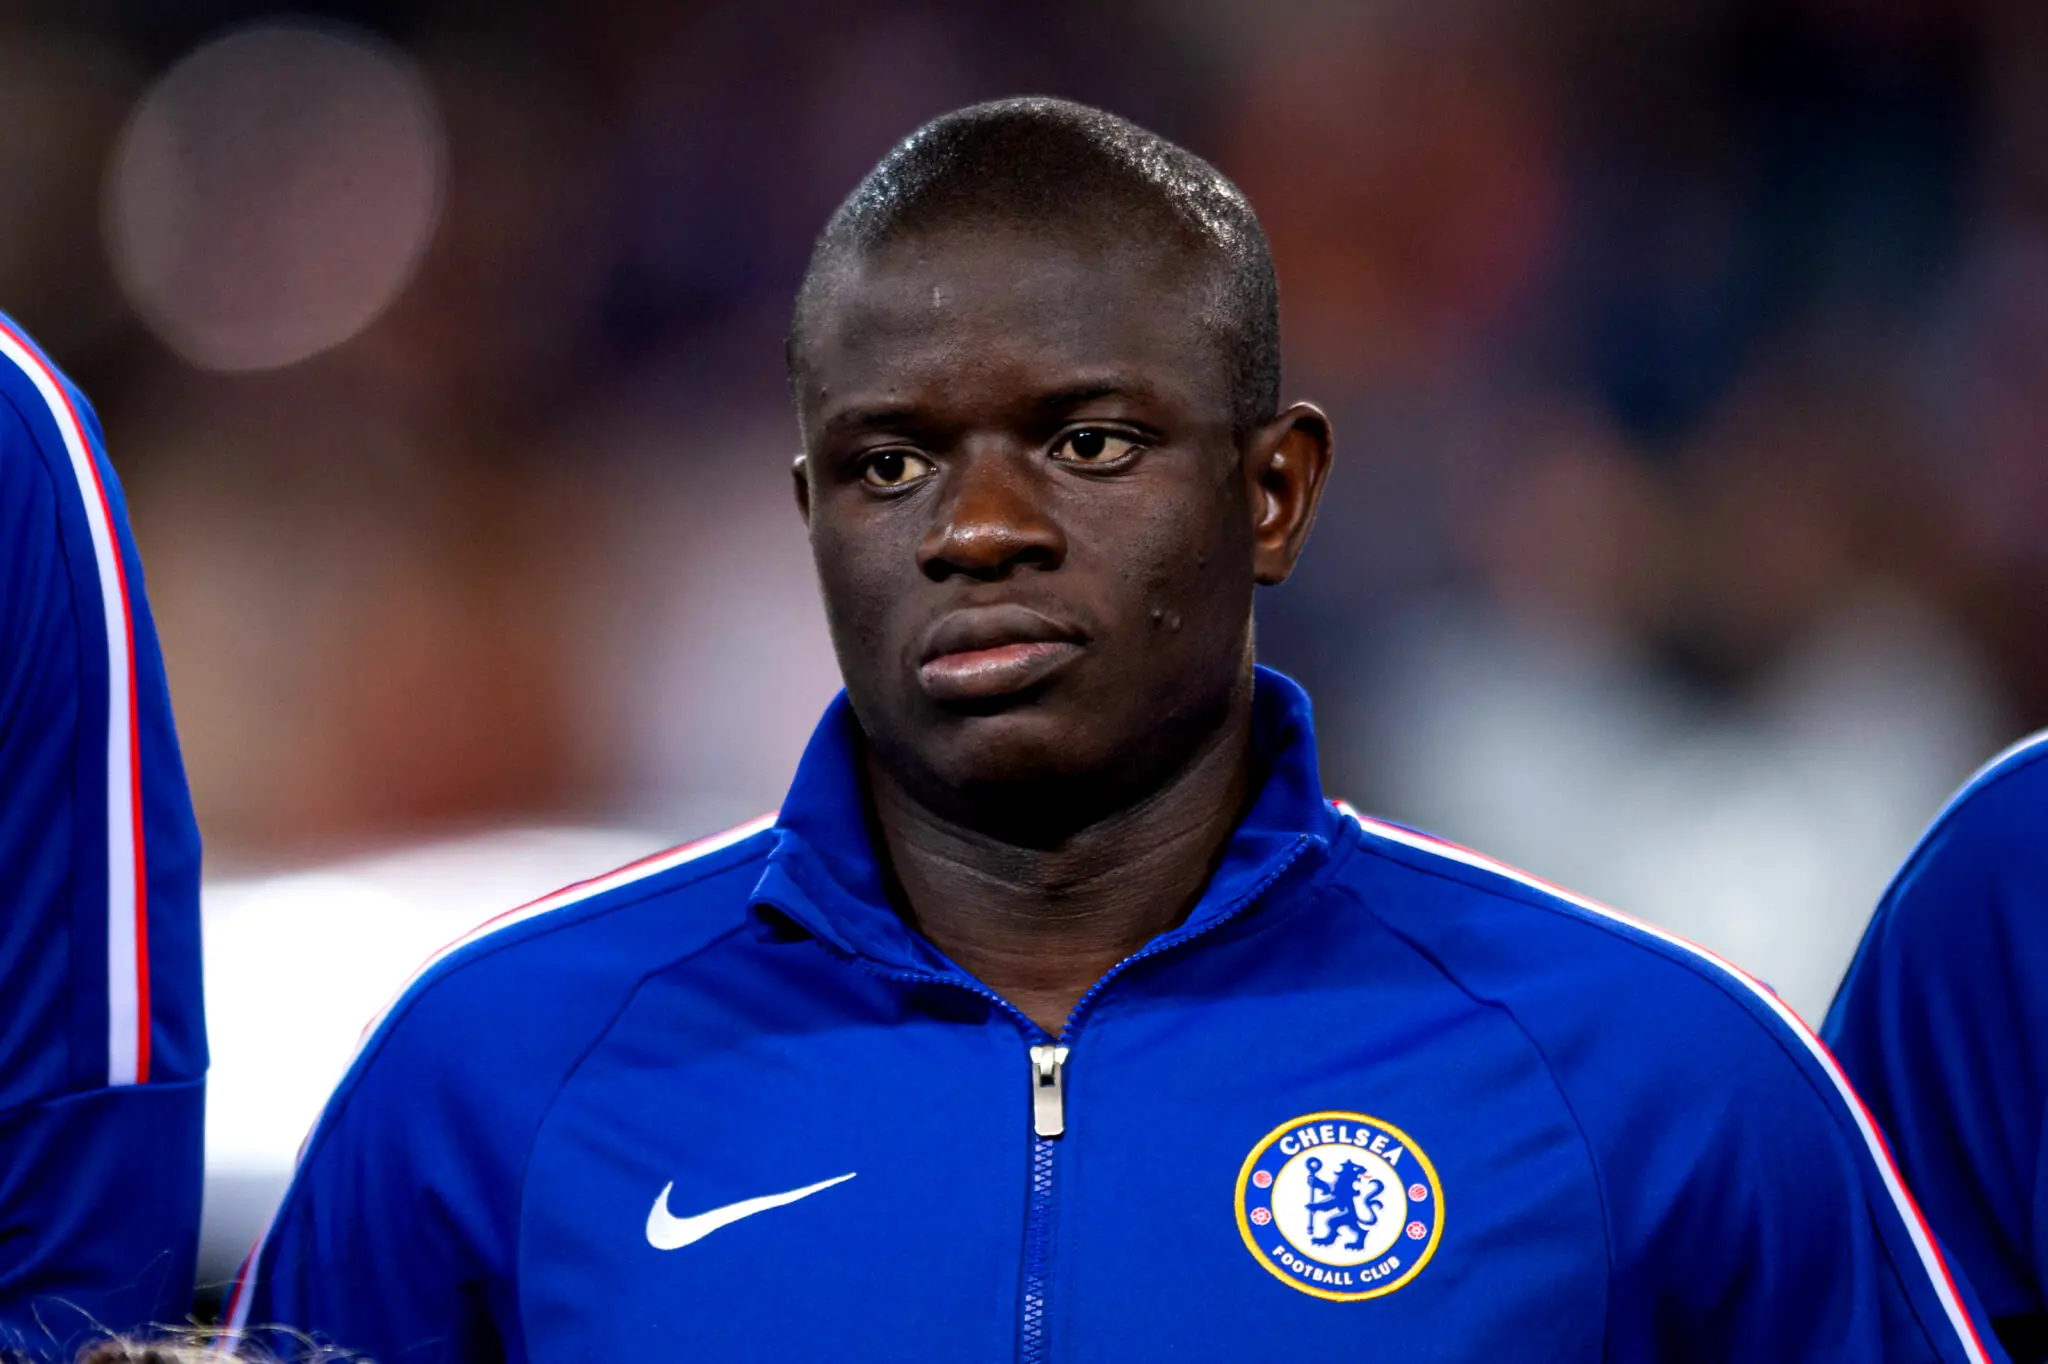 Kante returns as Liverpool, Chelsea seek redemption at Anfield